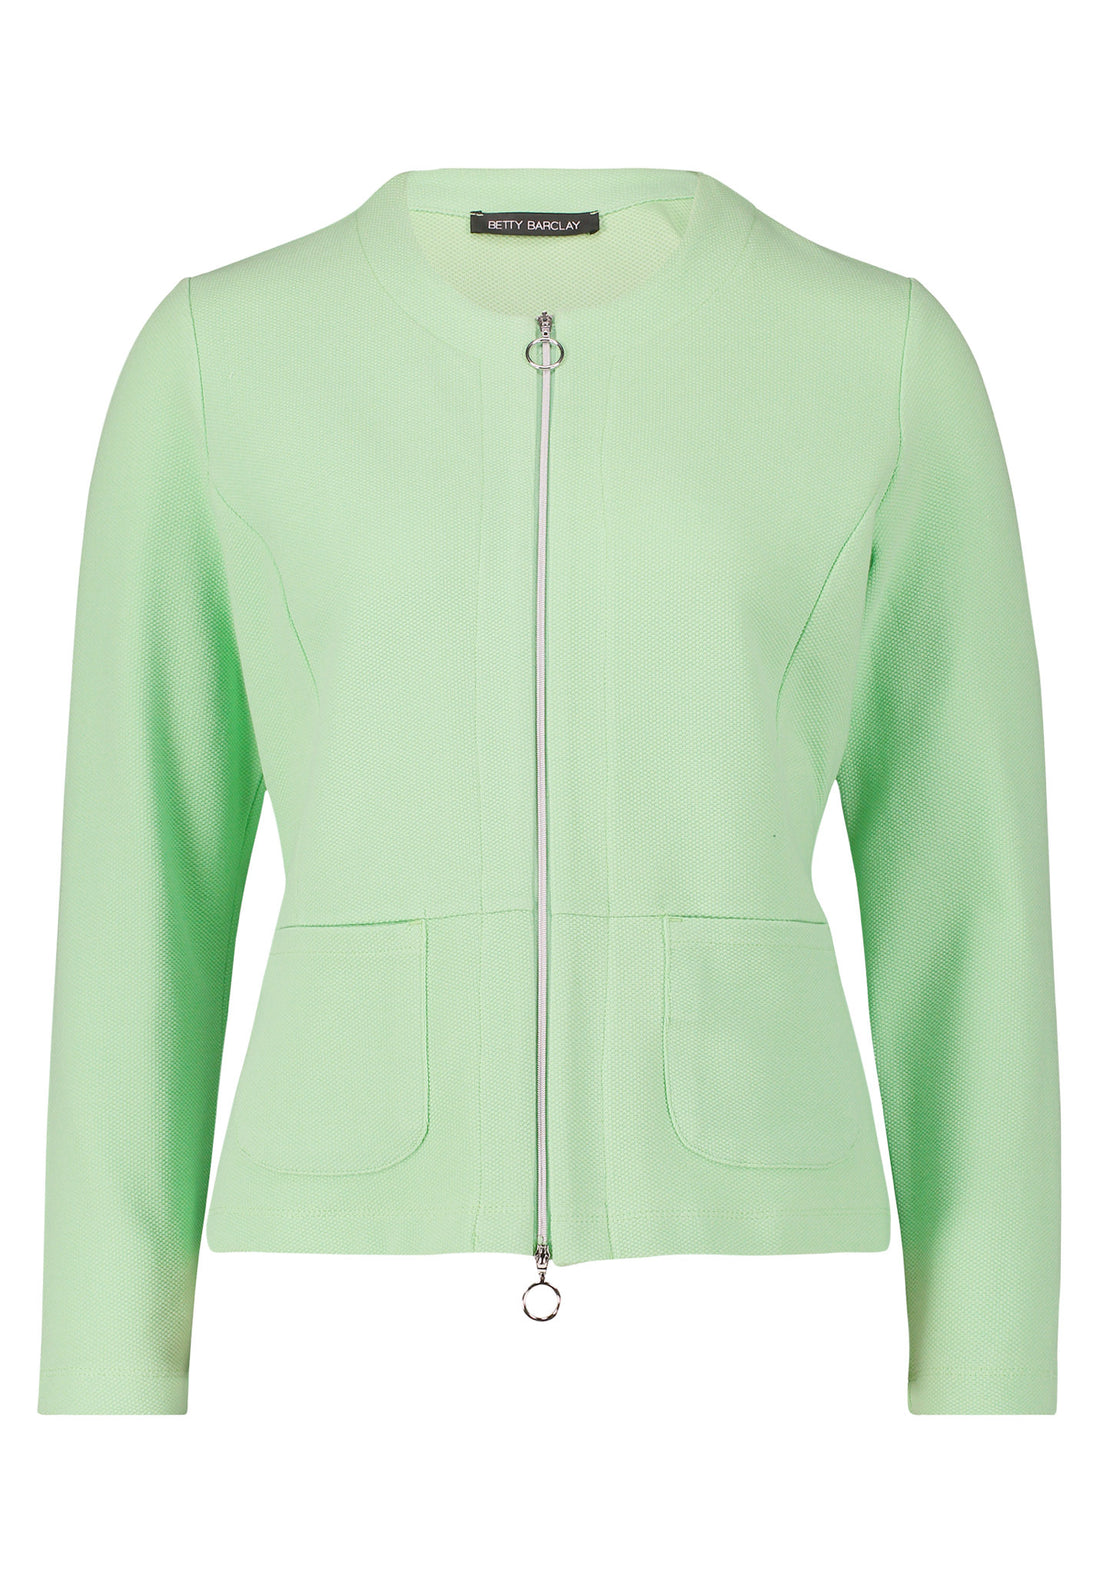 Pastel Green Fitted Blazer Style Cardigan_4340 1050_5242_01